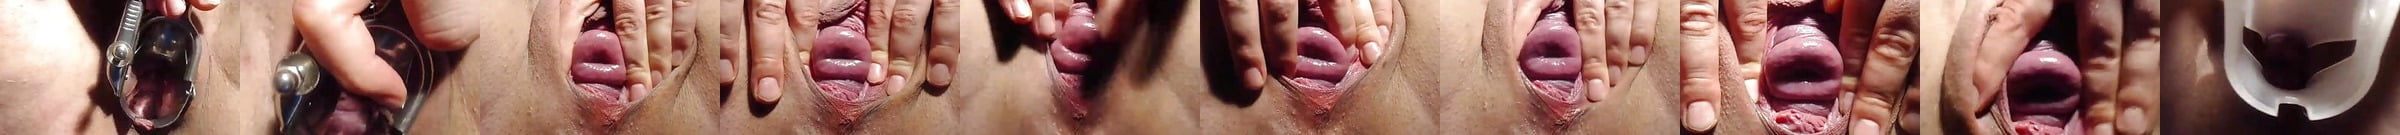 Japanese Milf Cervix Fucking With German Real Penis Dildo Xhamster